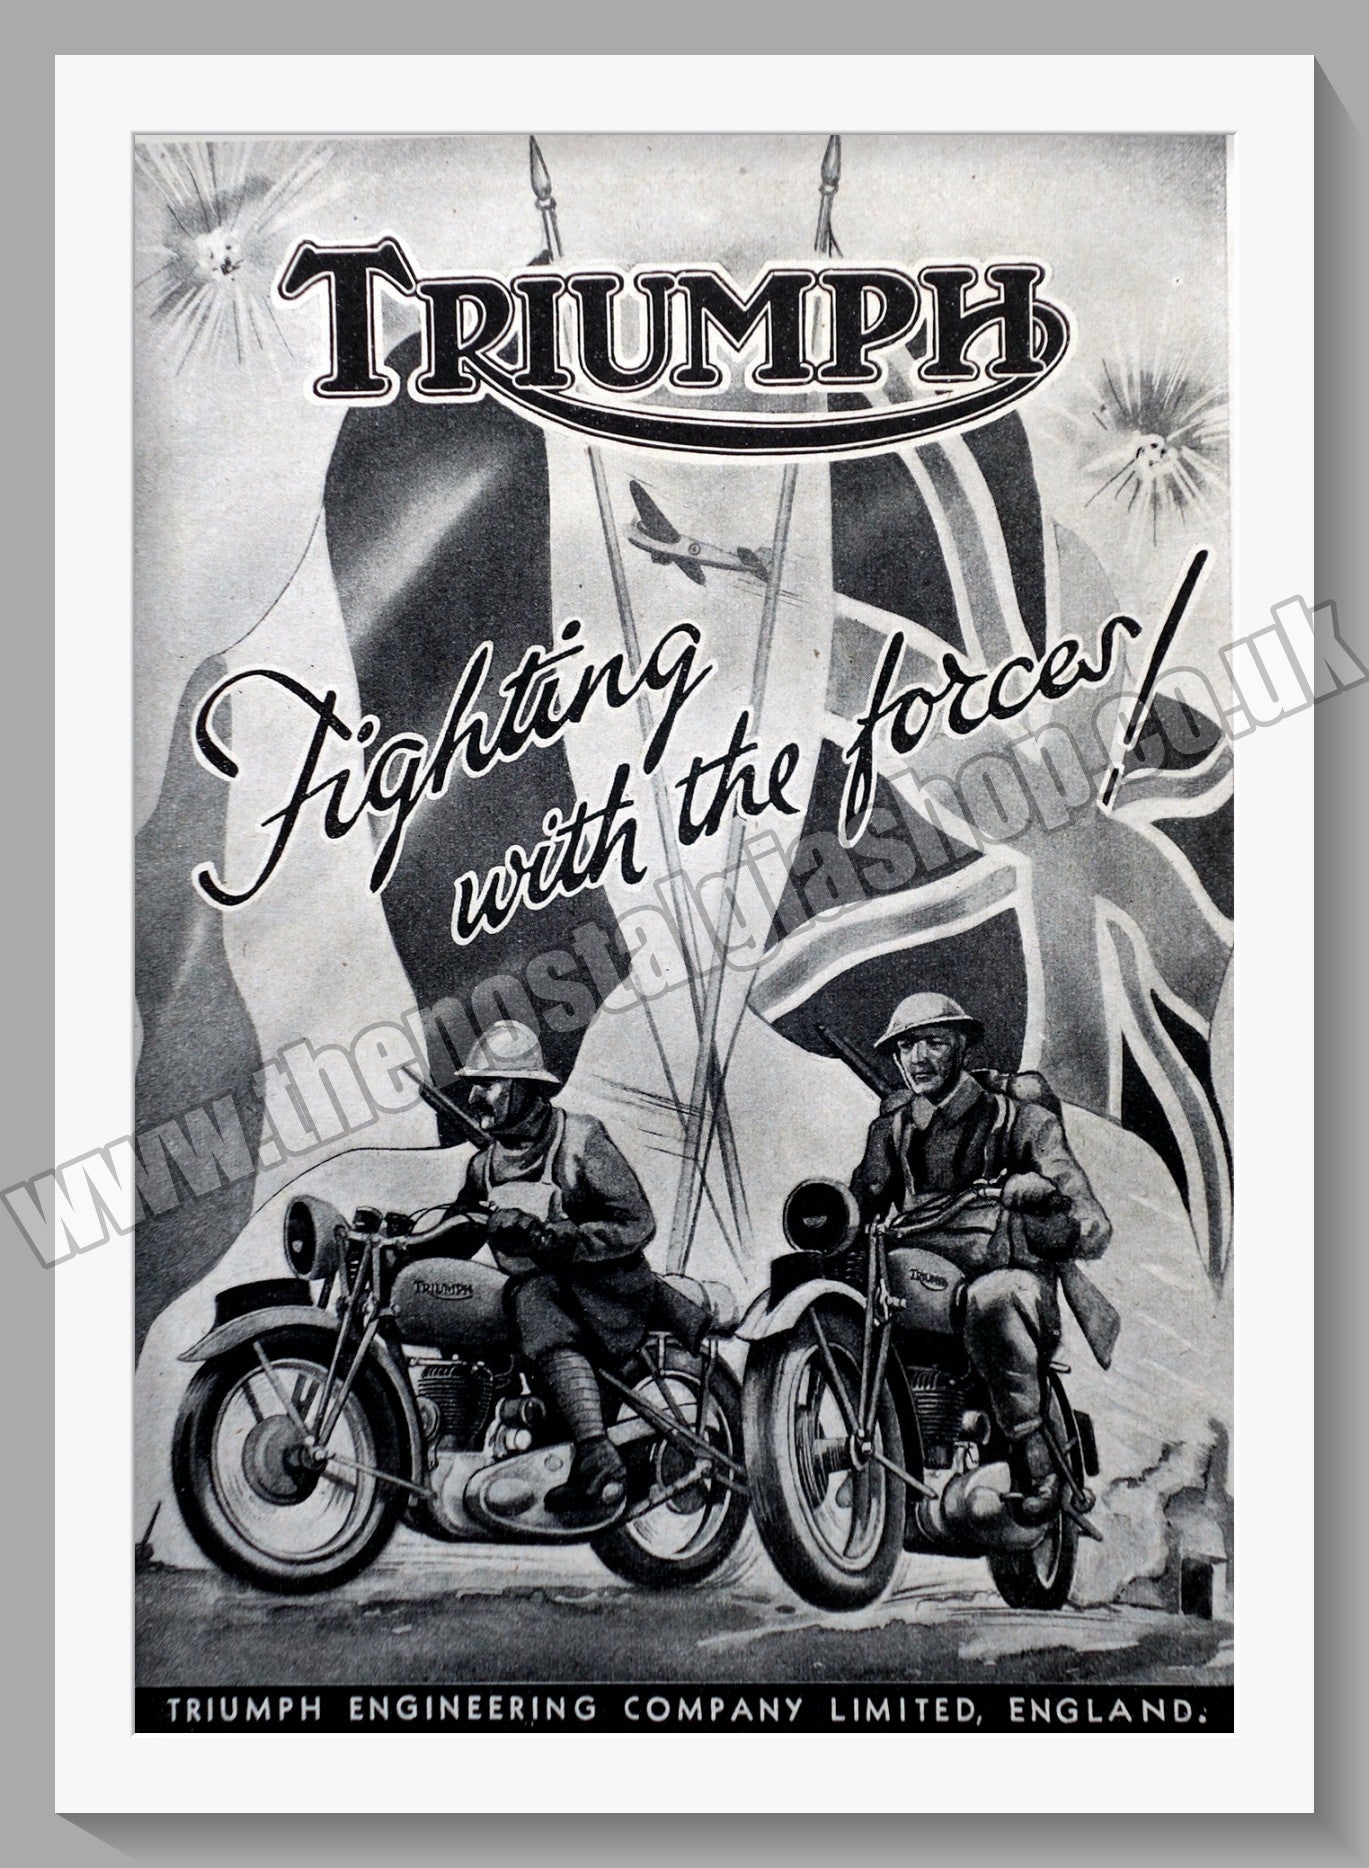 Triumph Motorcycles Fighting With the Forces. Original advert 1940 (ref AD57935)